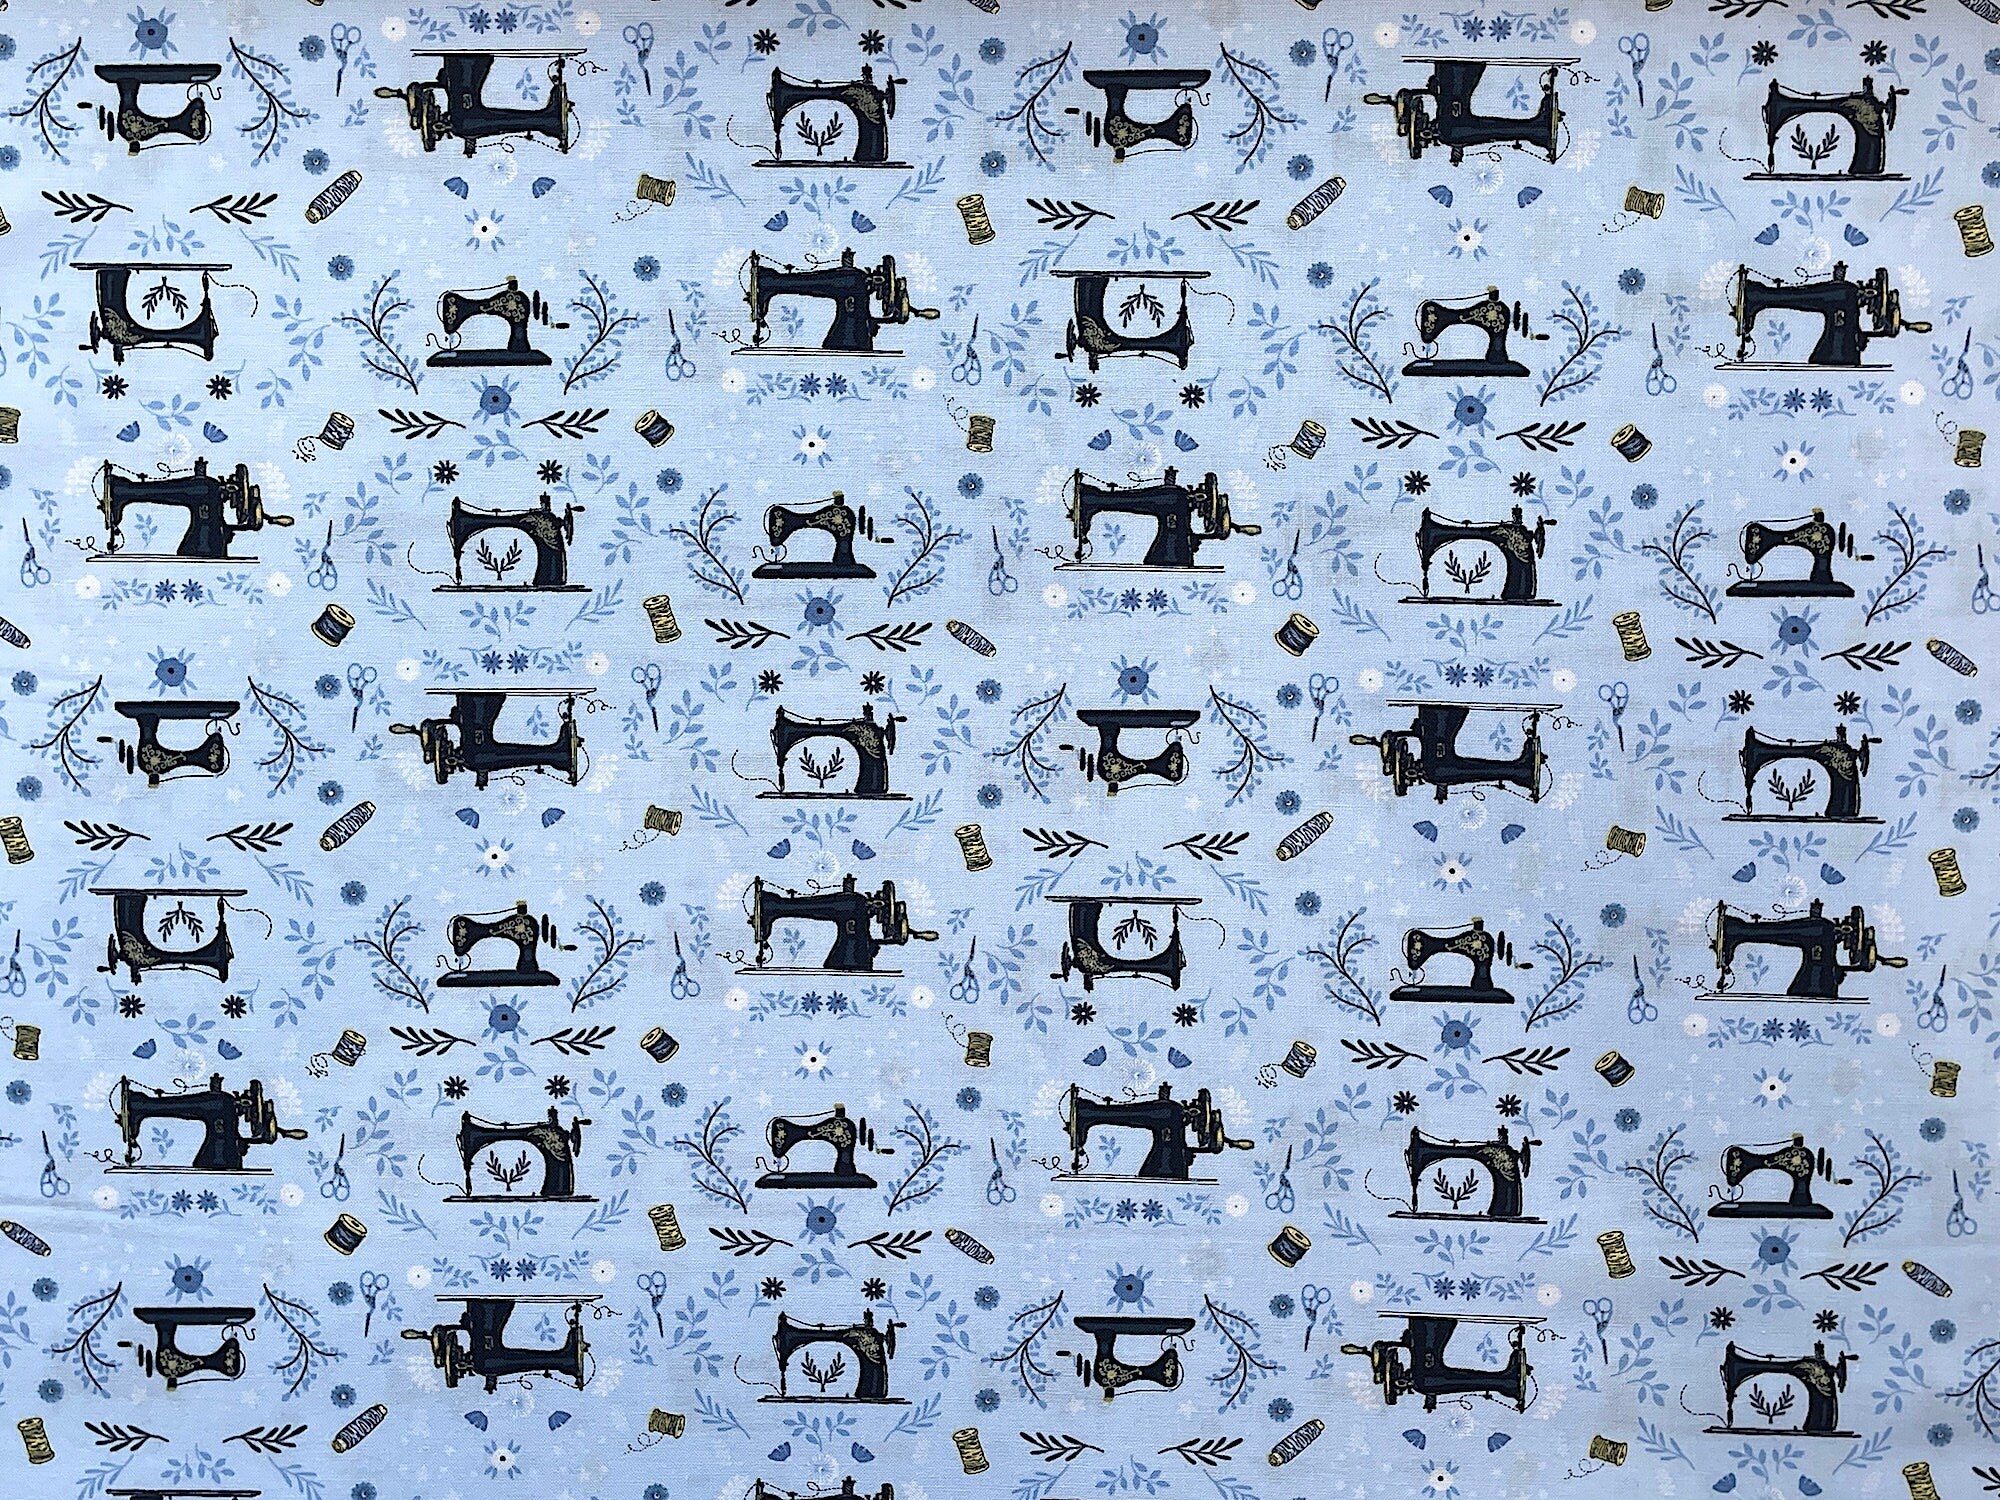 Blue cotton fabric covered with black sewing machines and spools of thread.